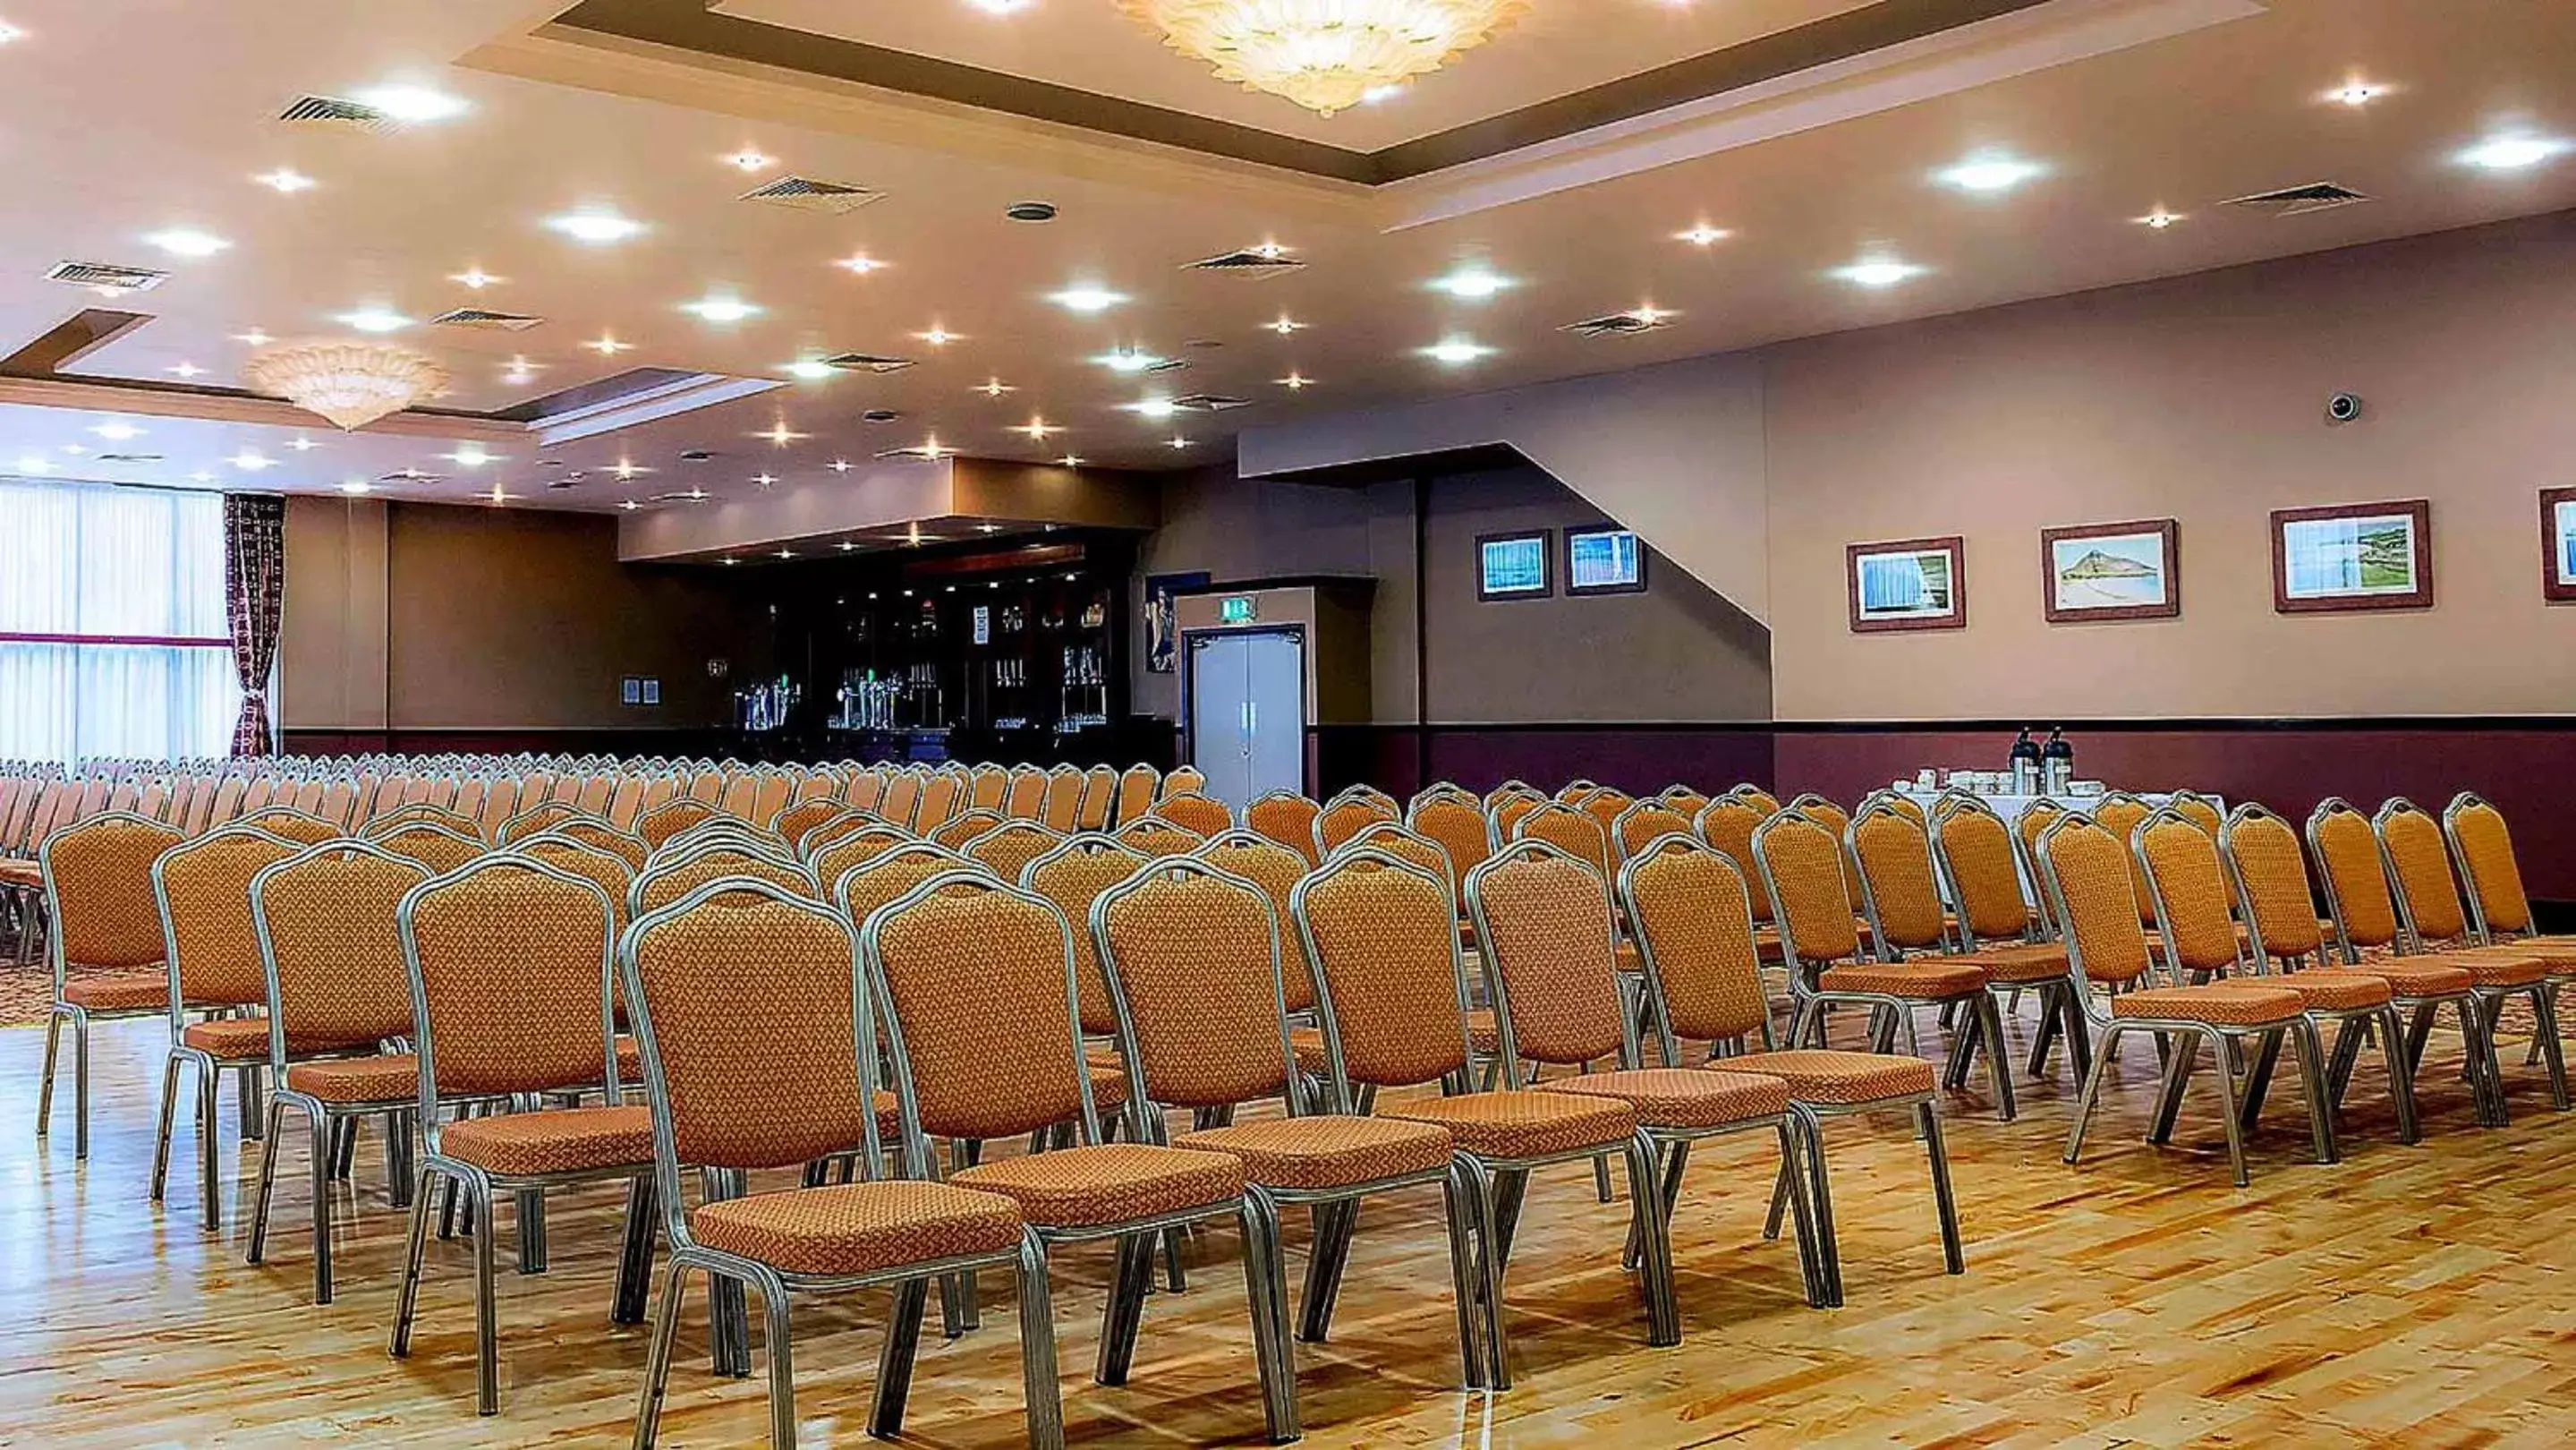 Meeting/conference room, Banquet Facilities in Great National Hotel Ballina